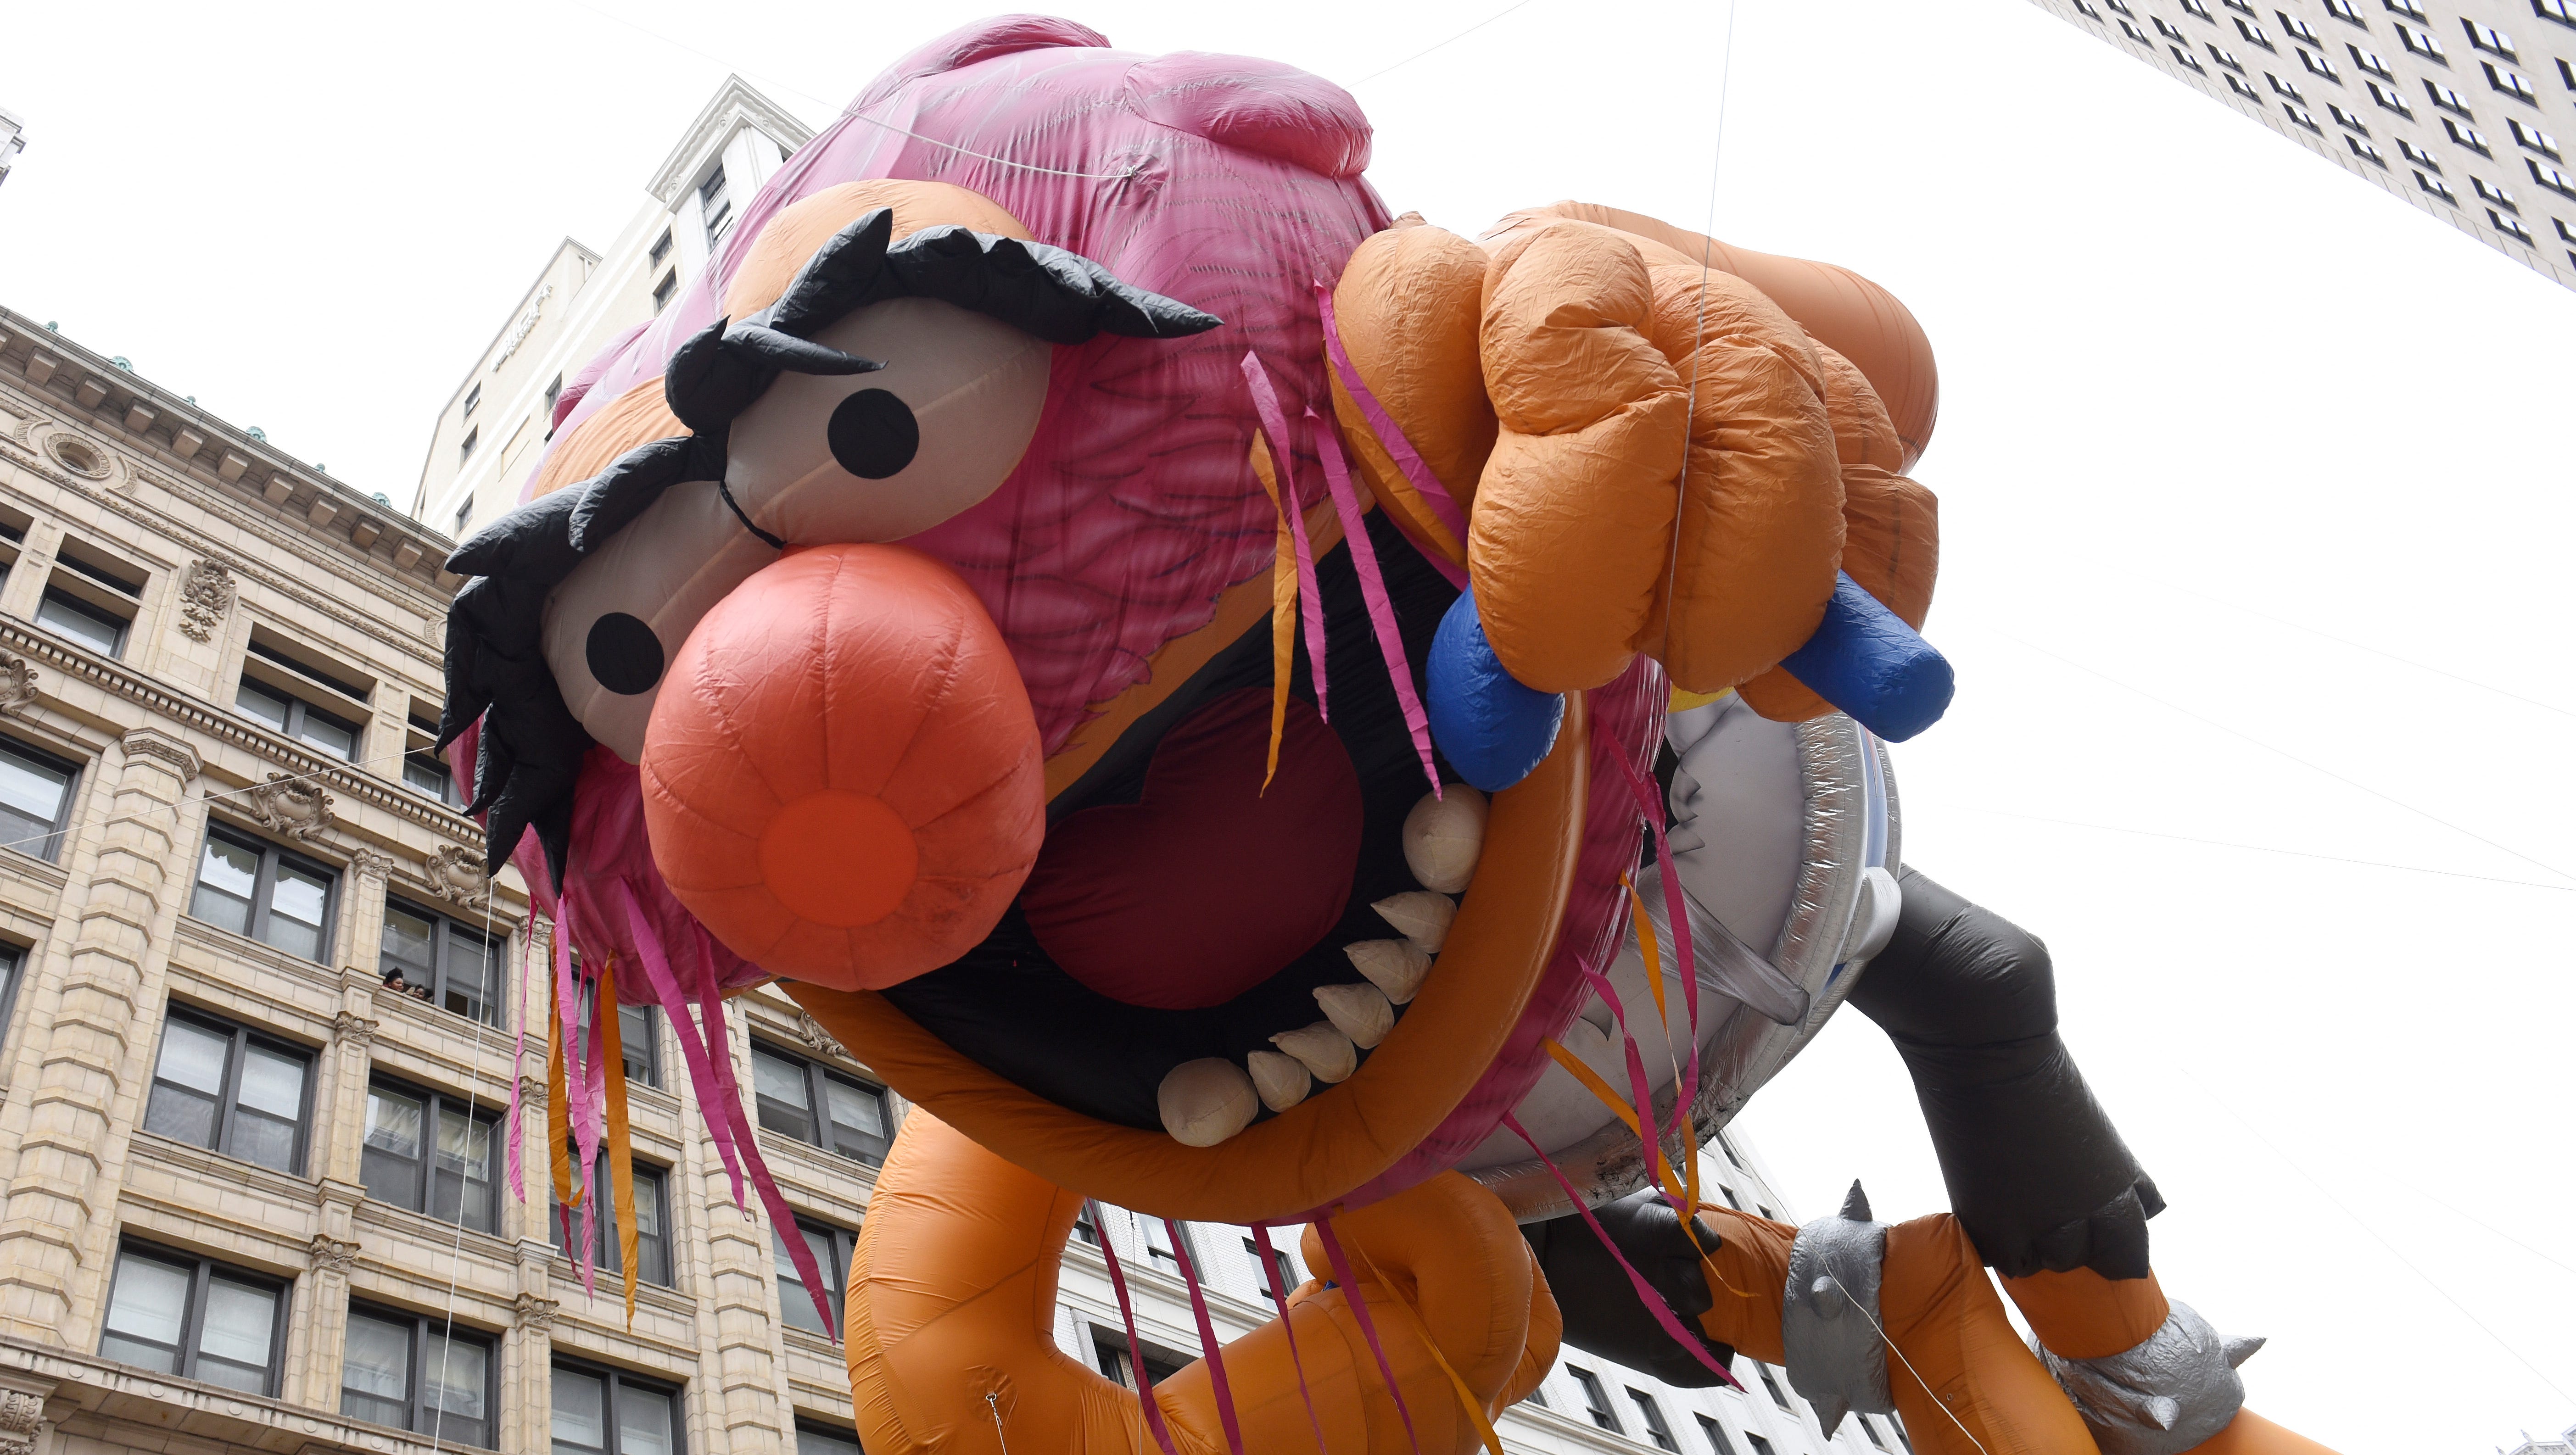 "Animal" from the Muppets gets his own balloon in America's Thanksgiving Parade, sponsored by Detroit Wayne Mental Health Authority.